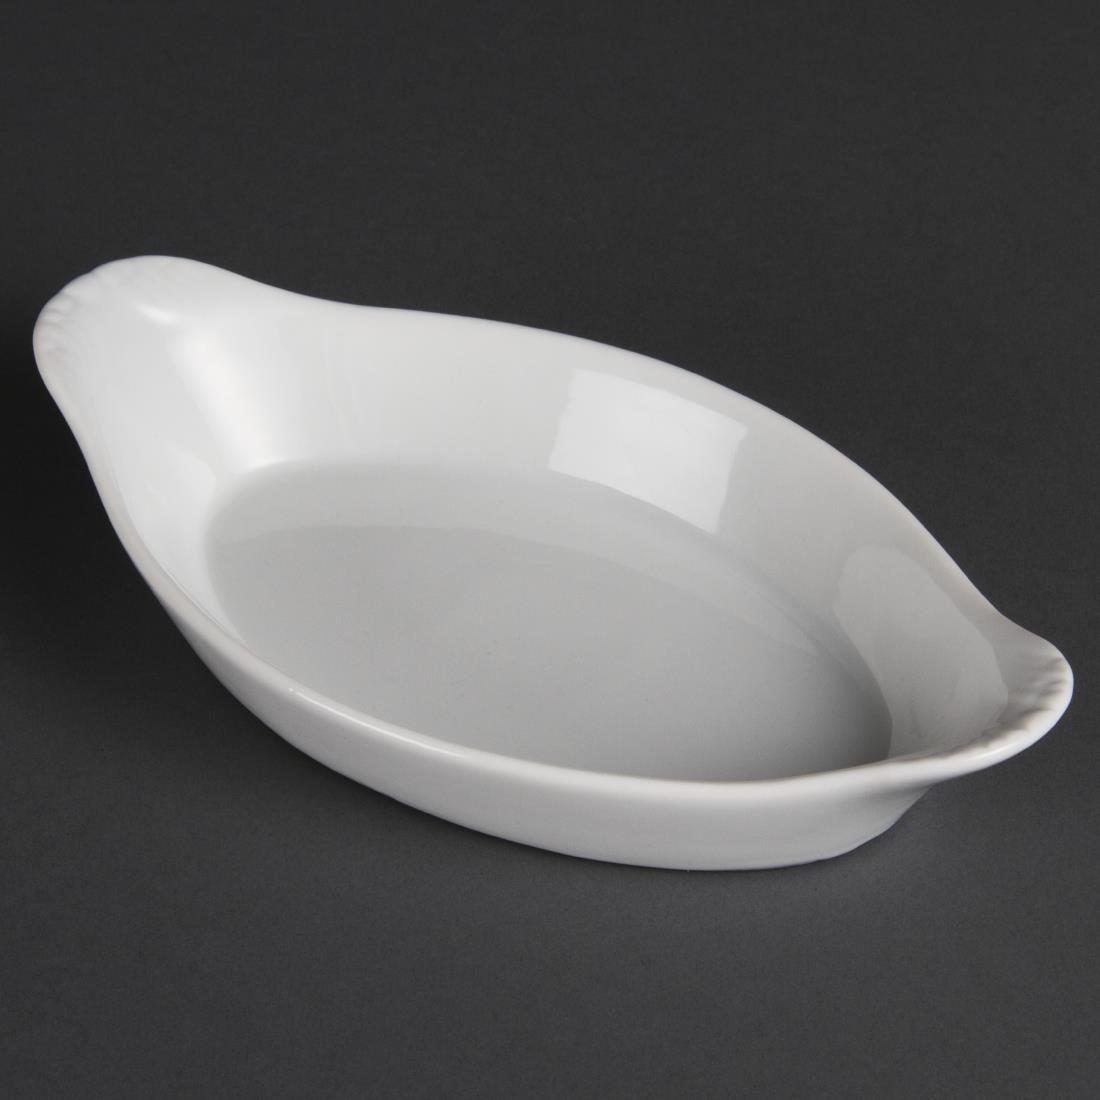 Olympia Whiteware Oval Eared Dishes 204mm (Pack of 6) - W441  - 1